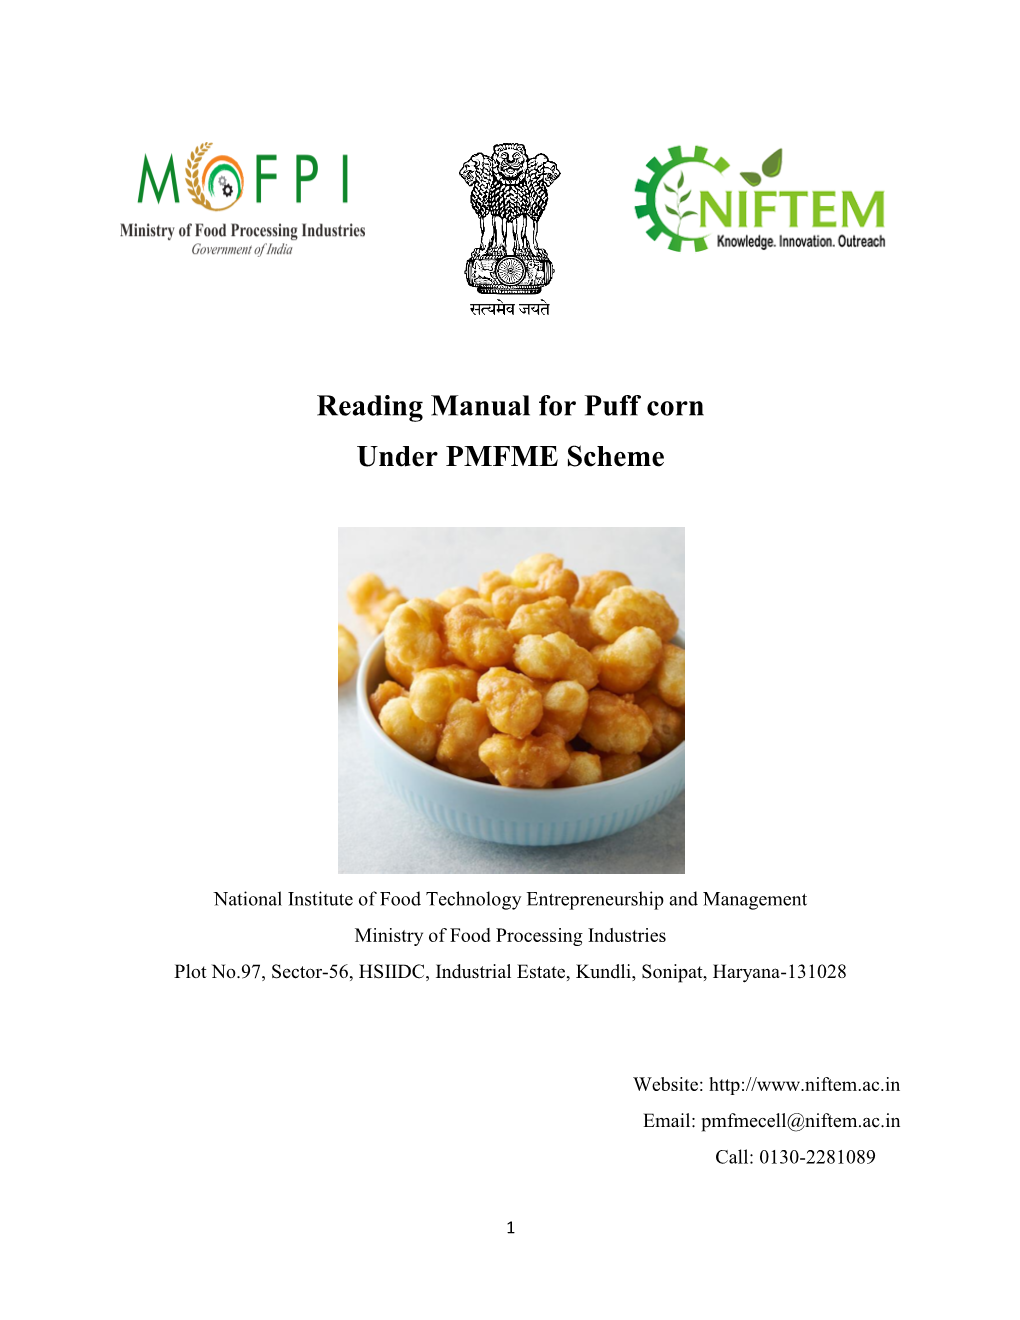 Reading Manual for Puff Corn Under PMFME Scheme